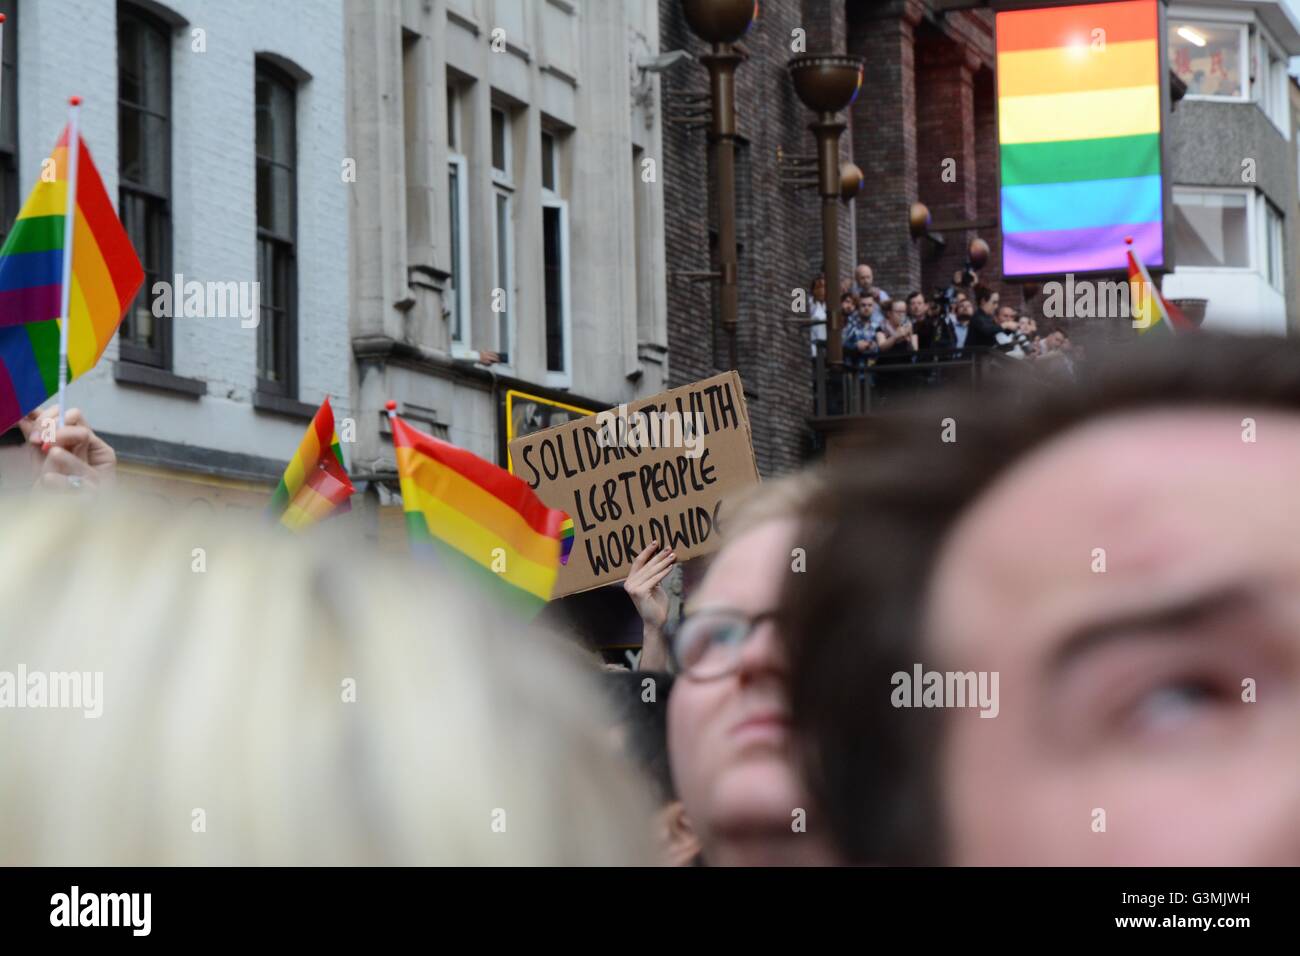 London, UK. June 13th 2016. A sign calls for solidarity with all LBGT members globally. Credit: Marc Ward/Alamy Live News Stock Photo